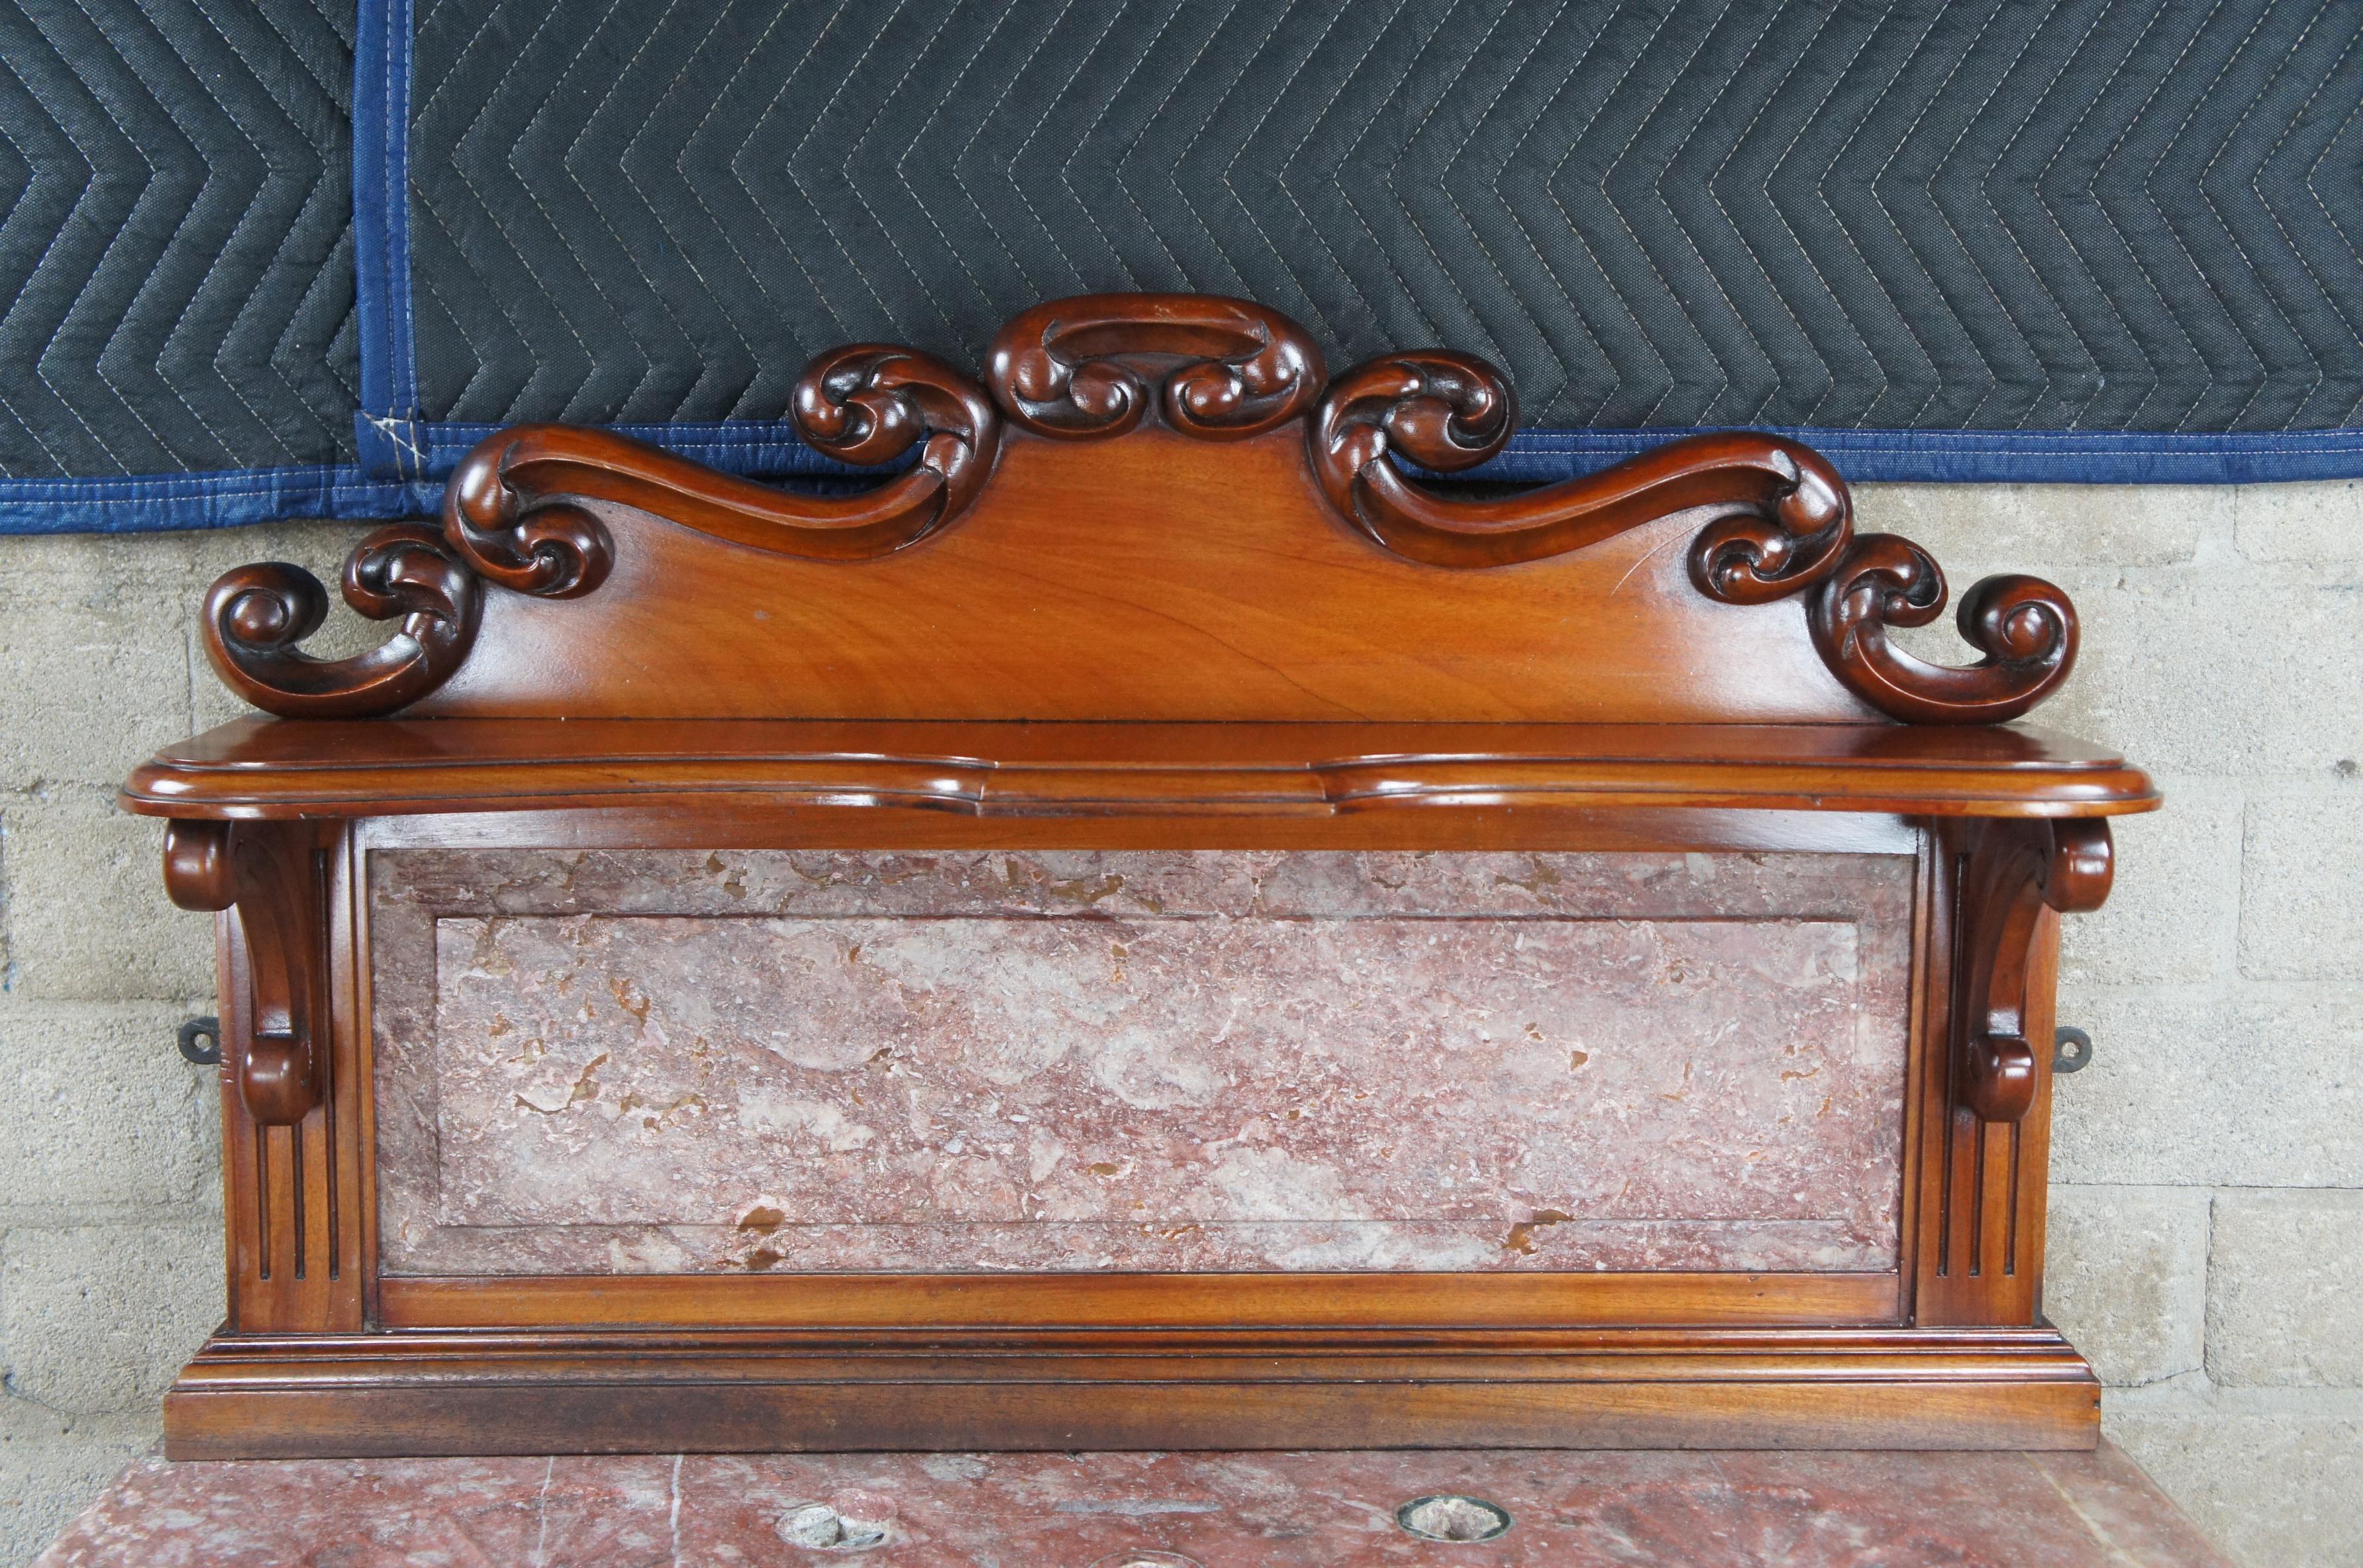 Rare Antique French Victorian Mahogany Marble Top Bathroom Vanity Porcelain Sink For Sale 1